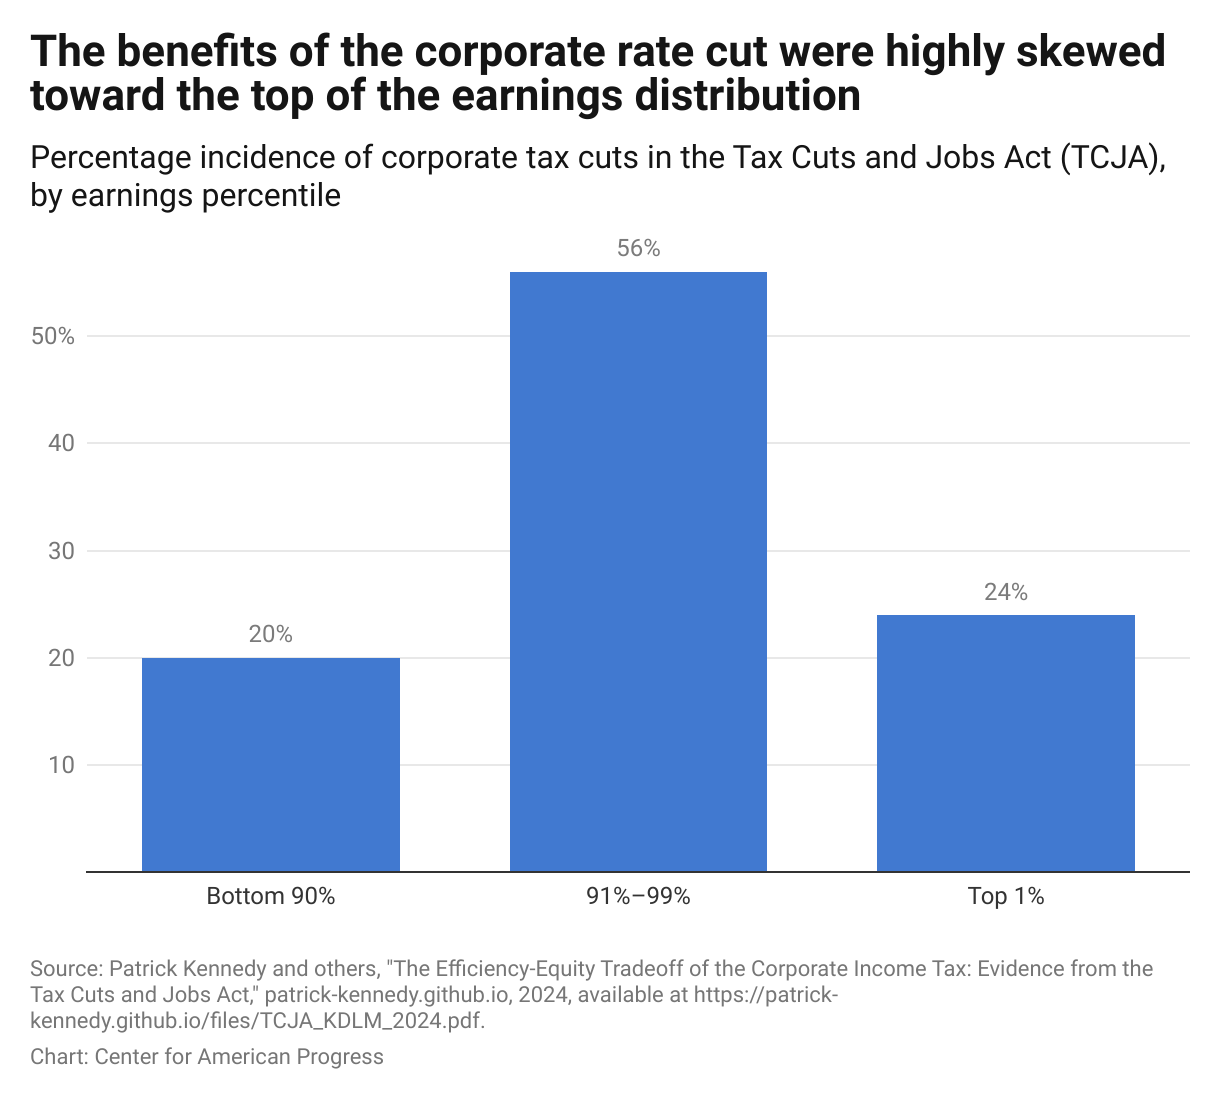 Bar chart showing that the benefits of the TCJA's corporate tax rate cuts were highly skewed toward those in the top earnings percentiles.